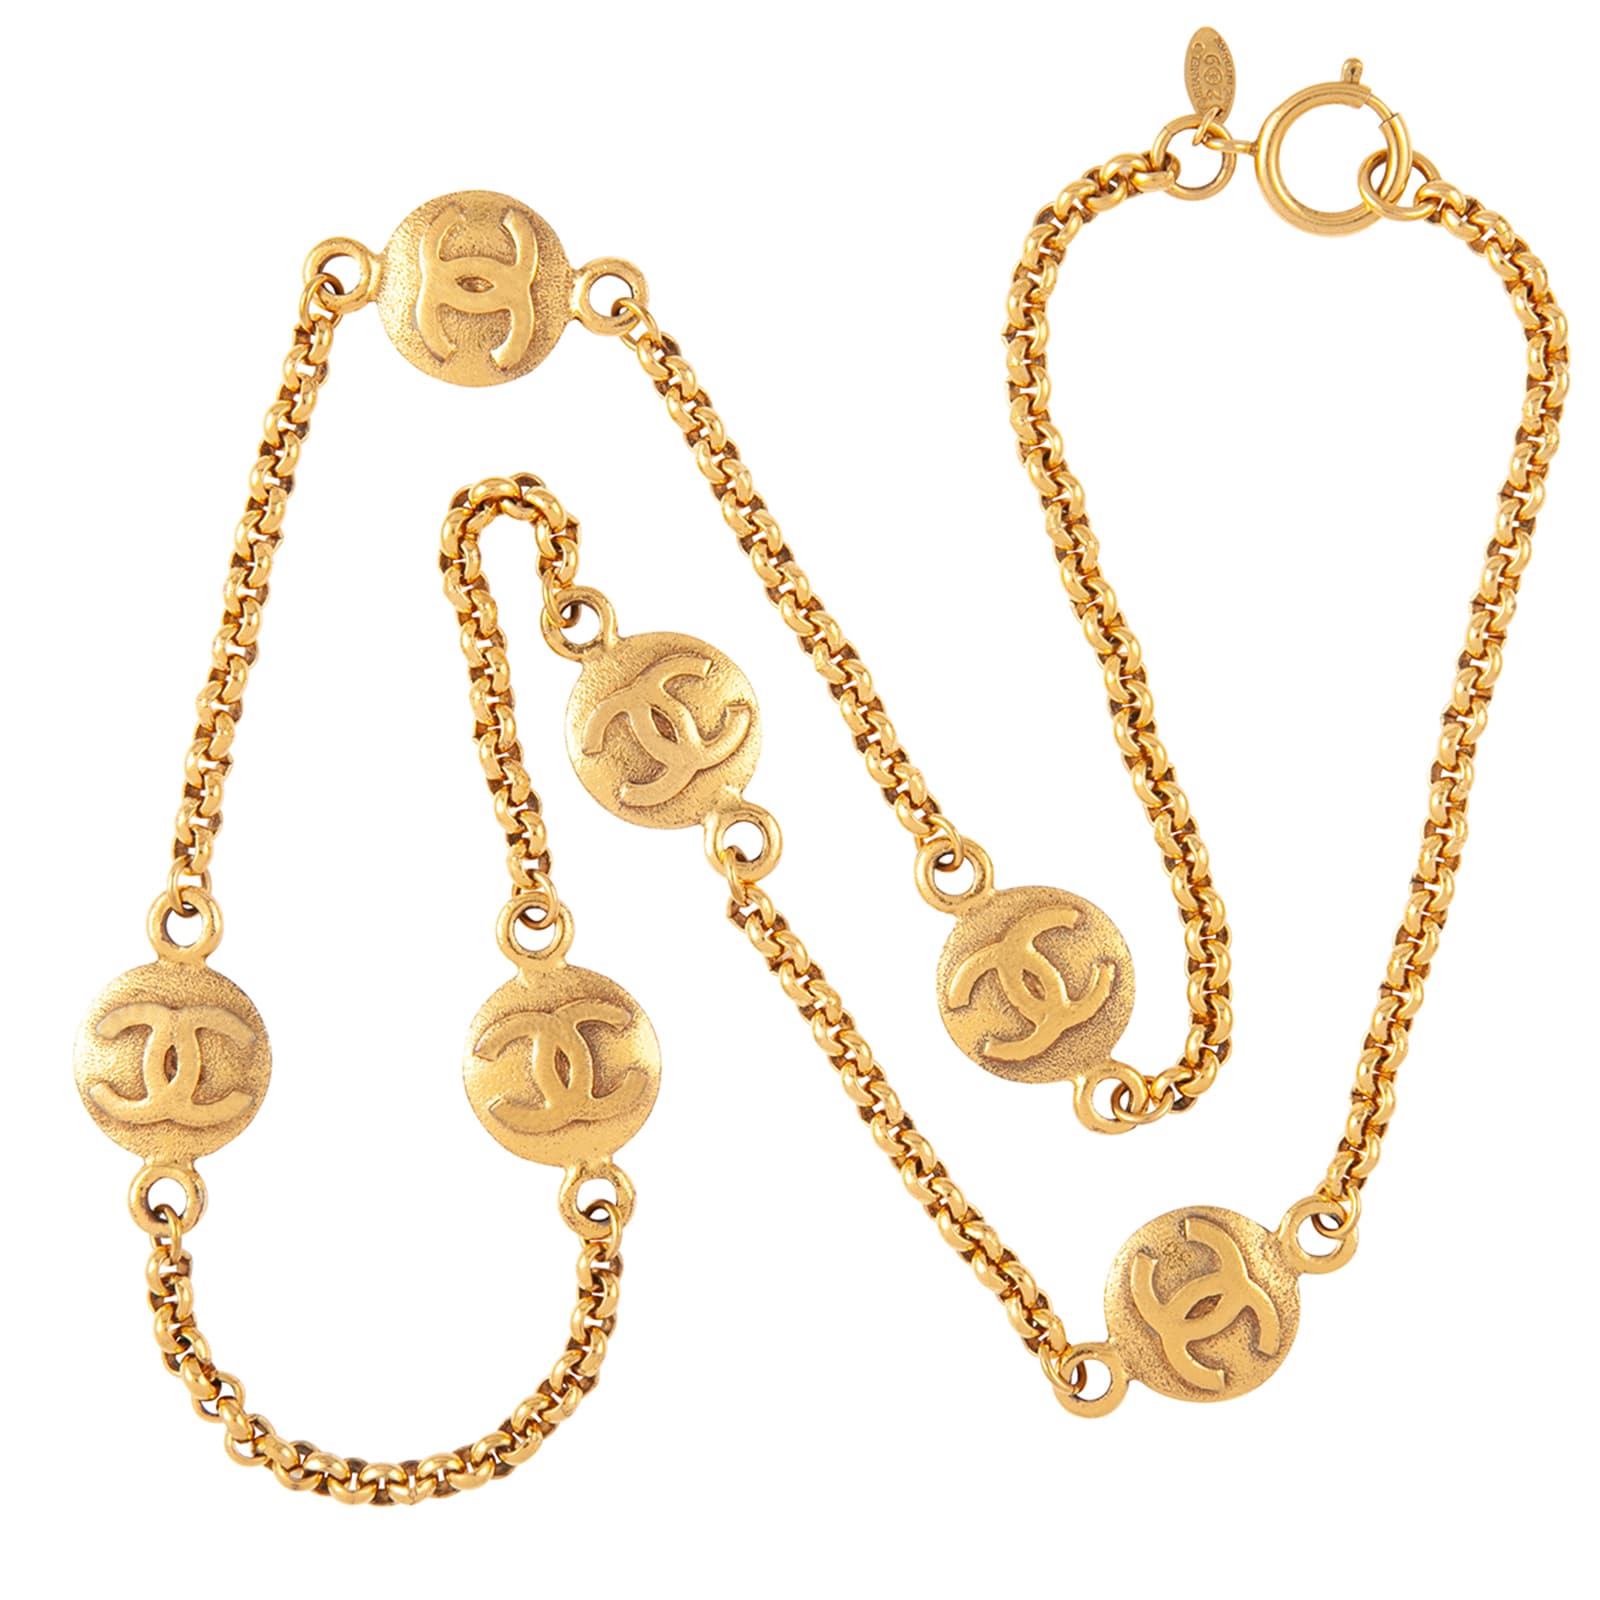 CHANEL PreOwned 1994 CC Medallion Necklace  Farfetch